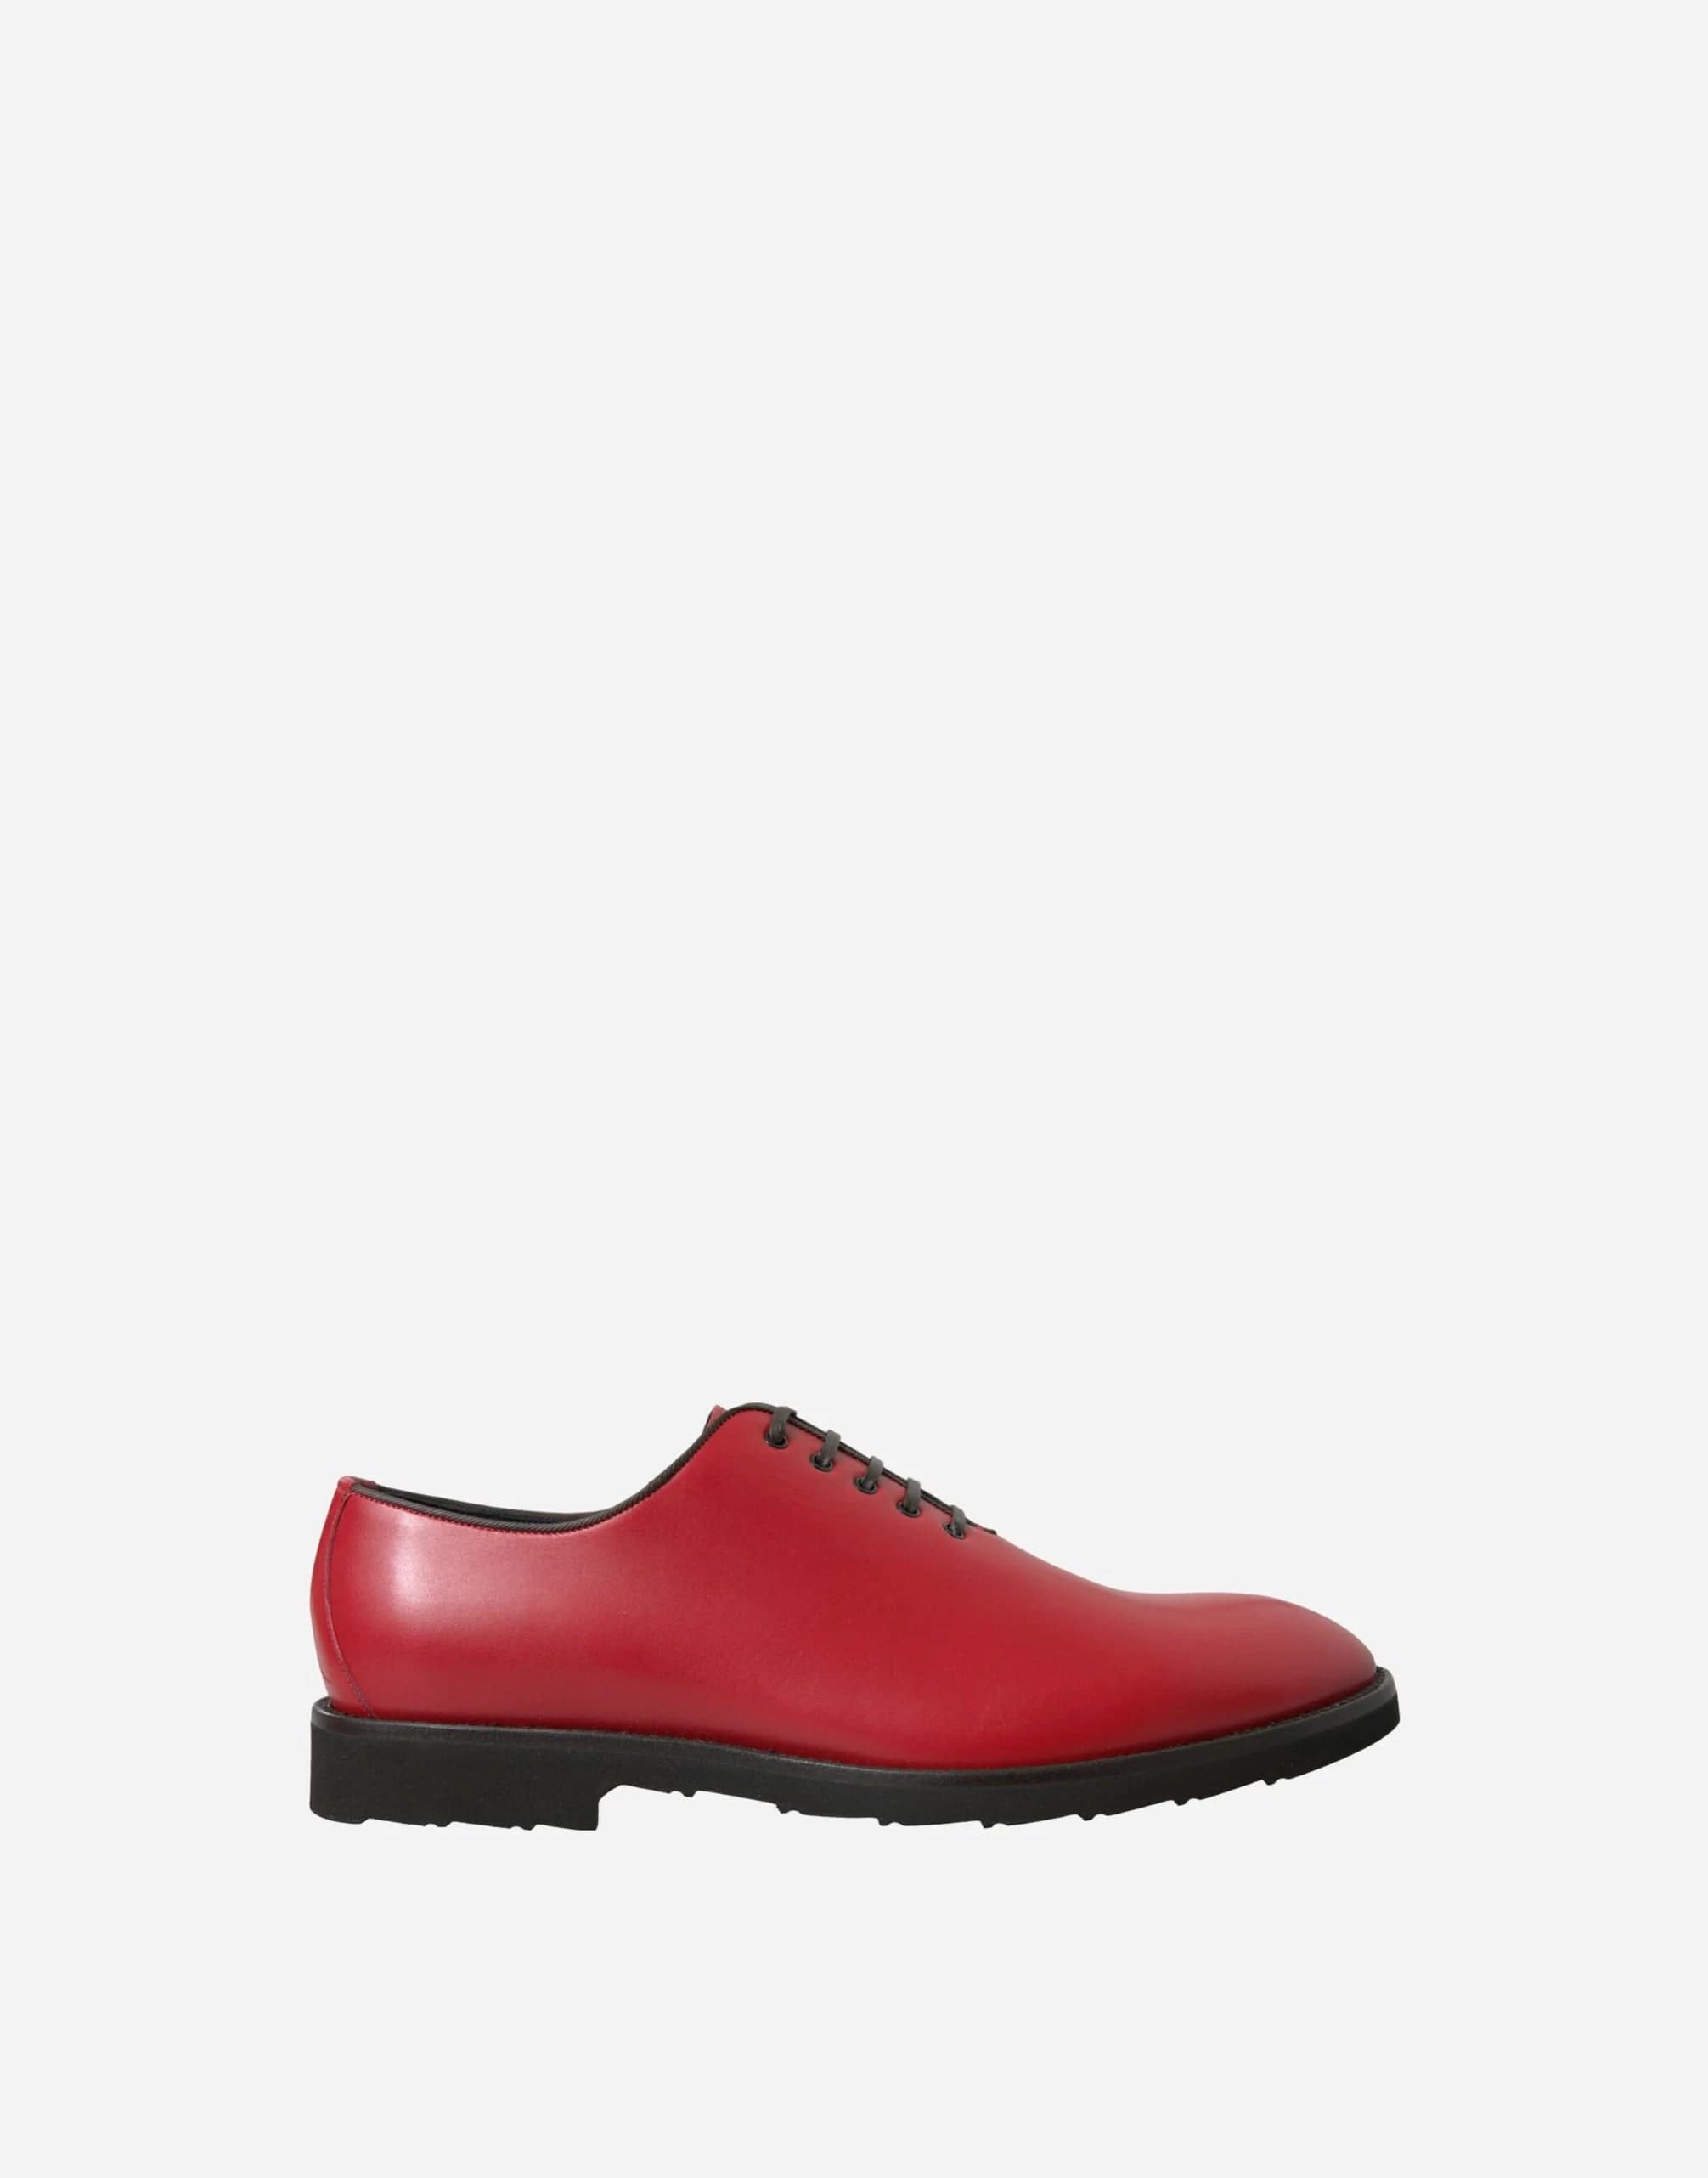 Lace Up Oxford Dress Shoes